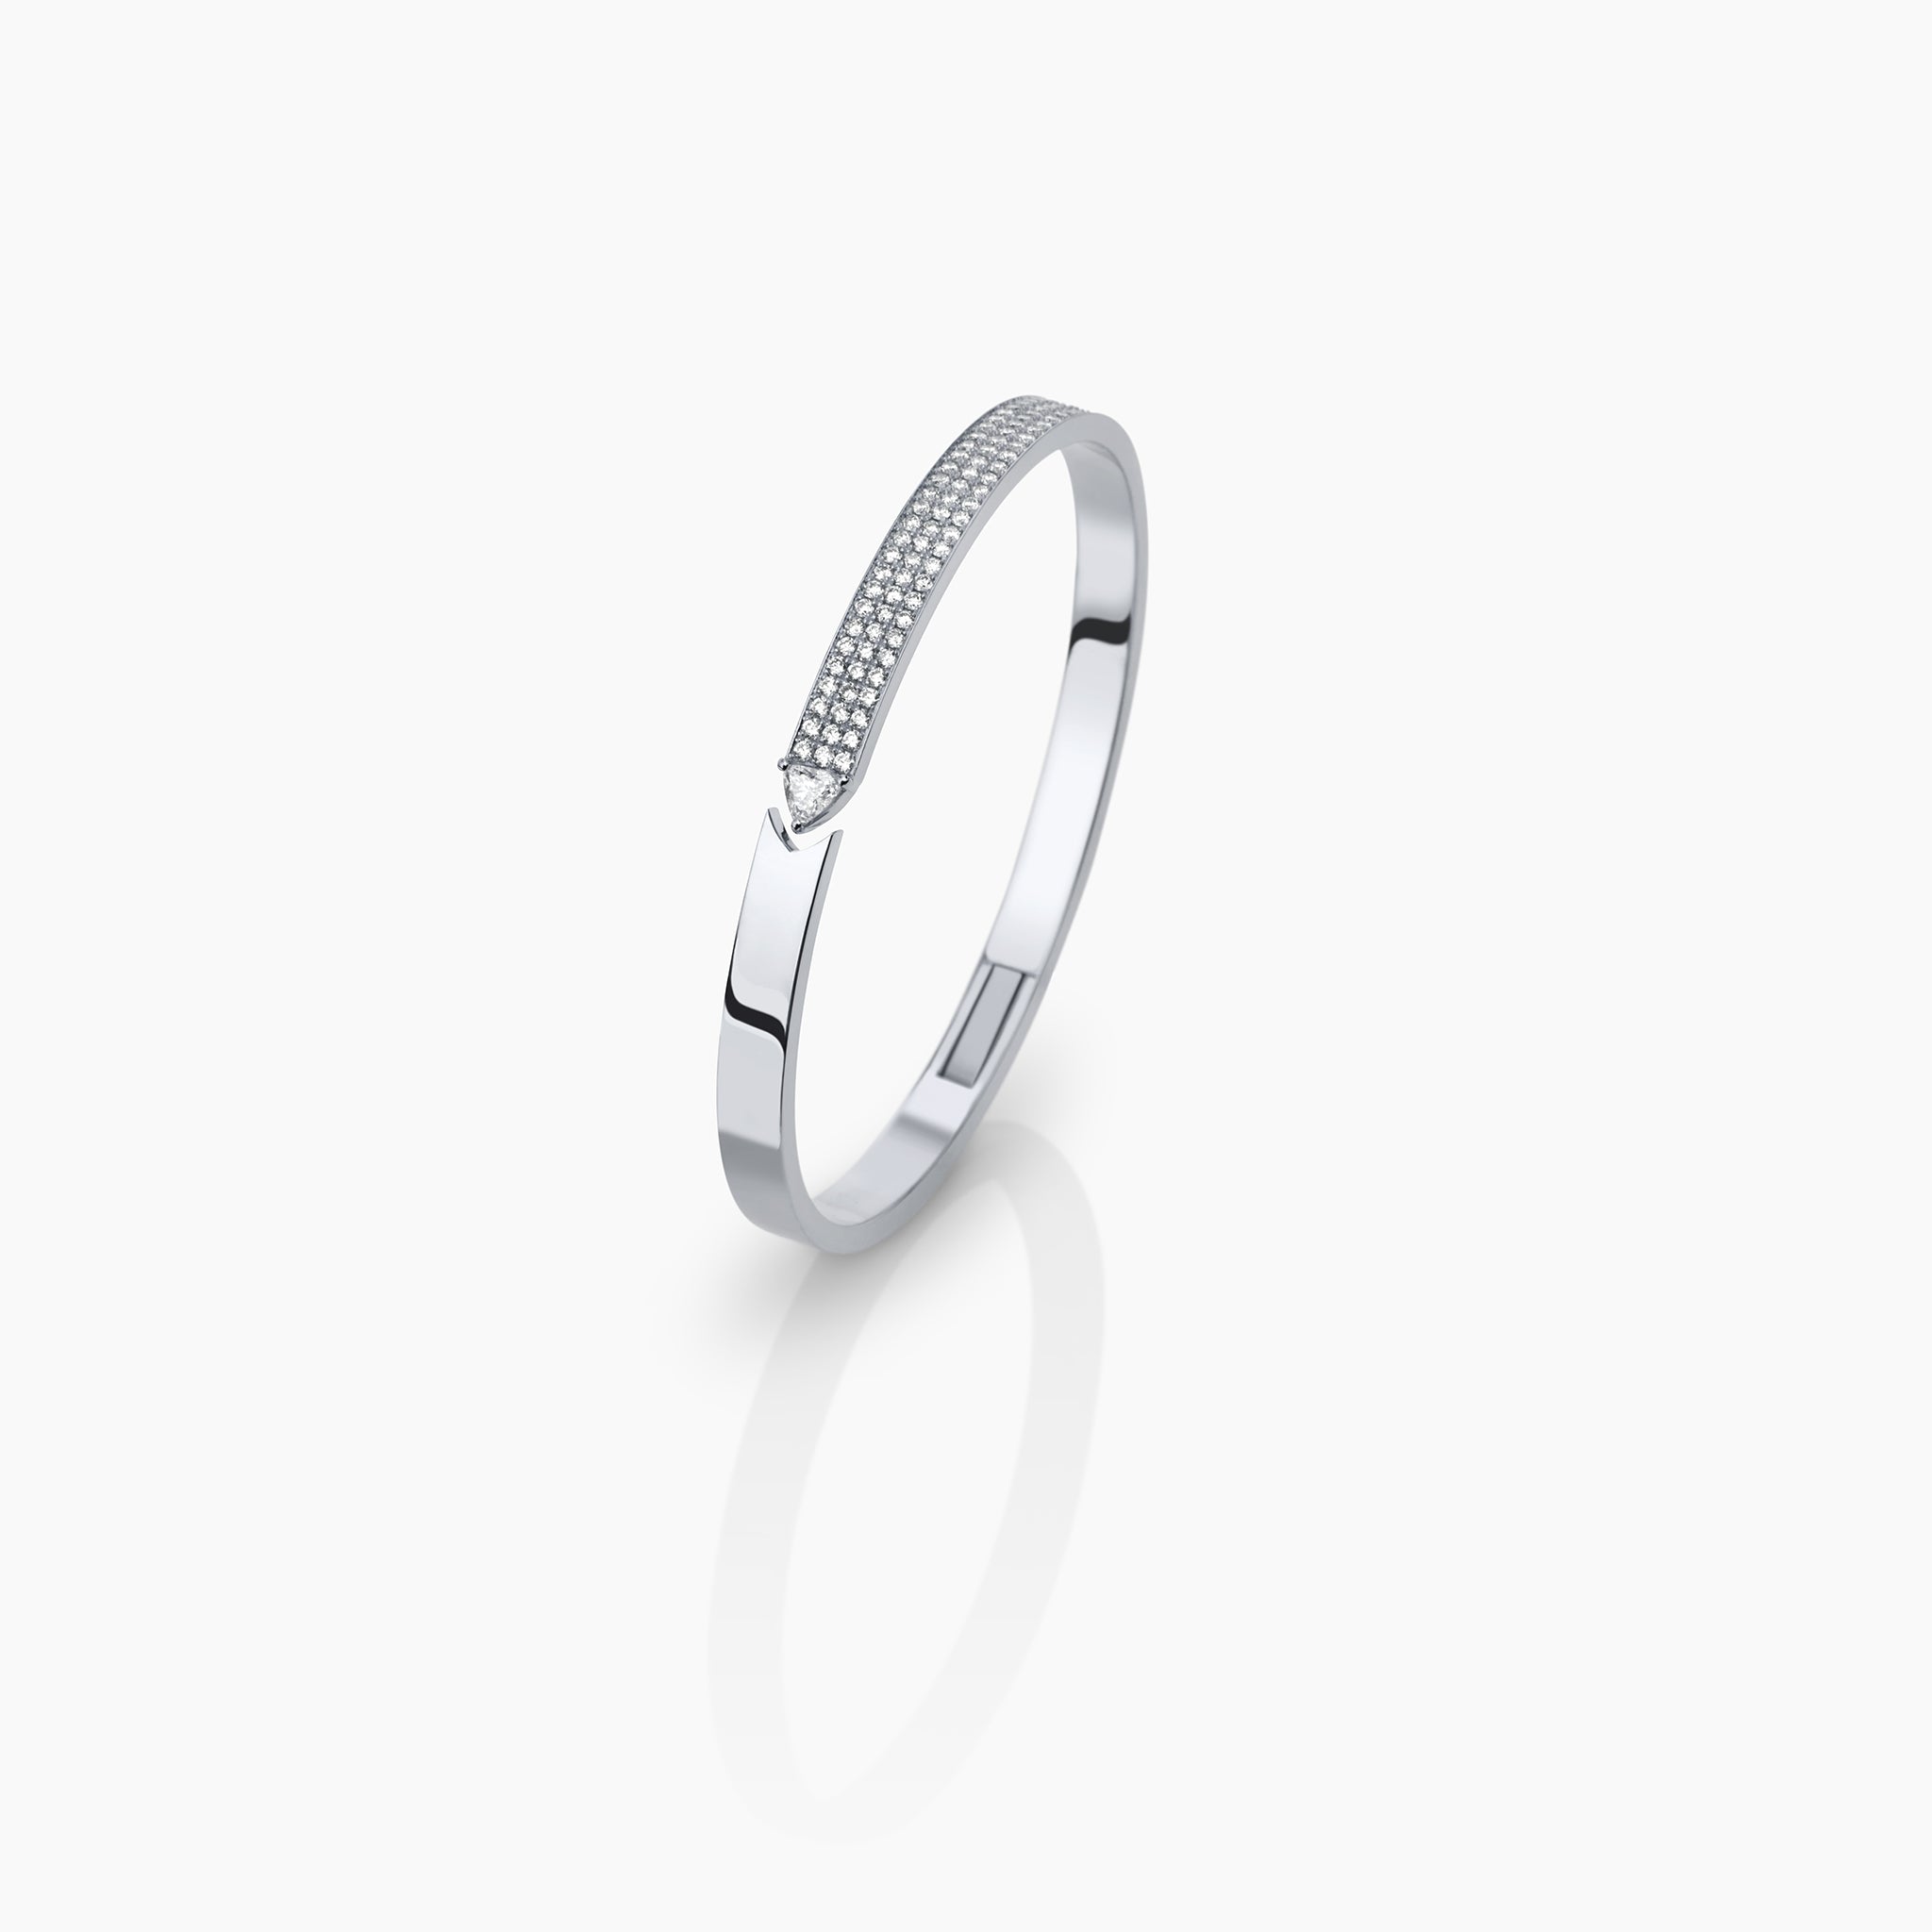 Stellar Standstill bangle in white gold featuring diamonds displayed against an off white background. 